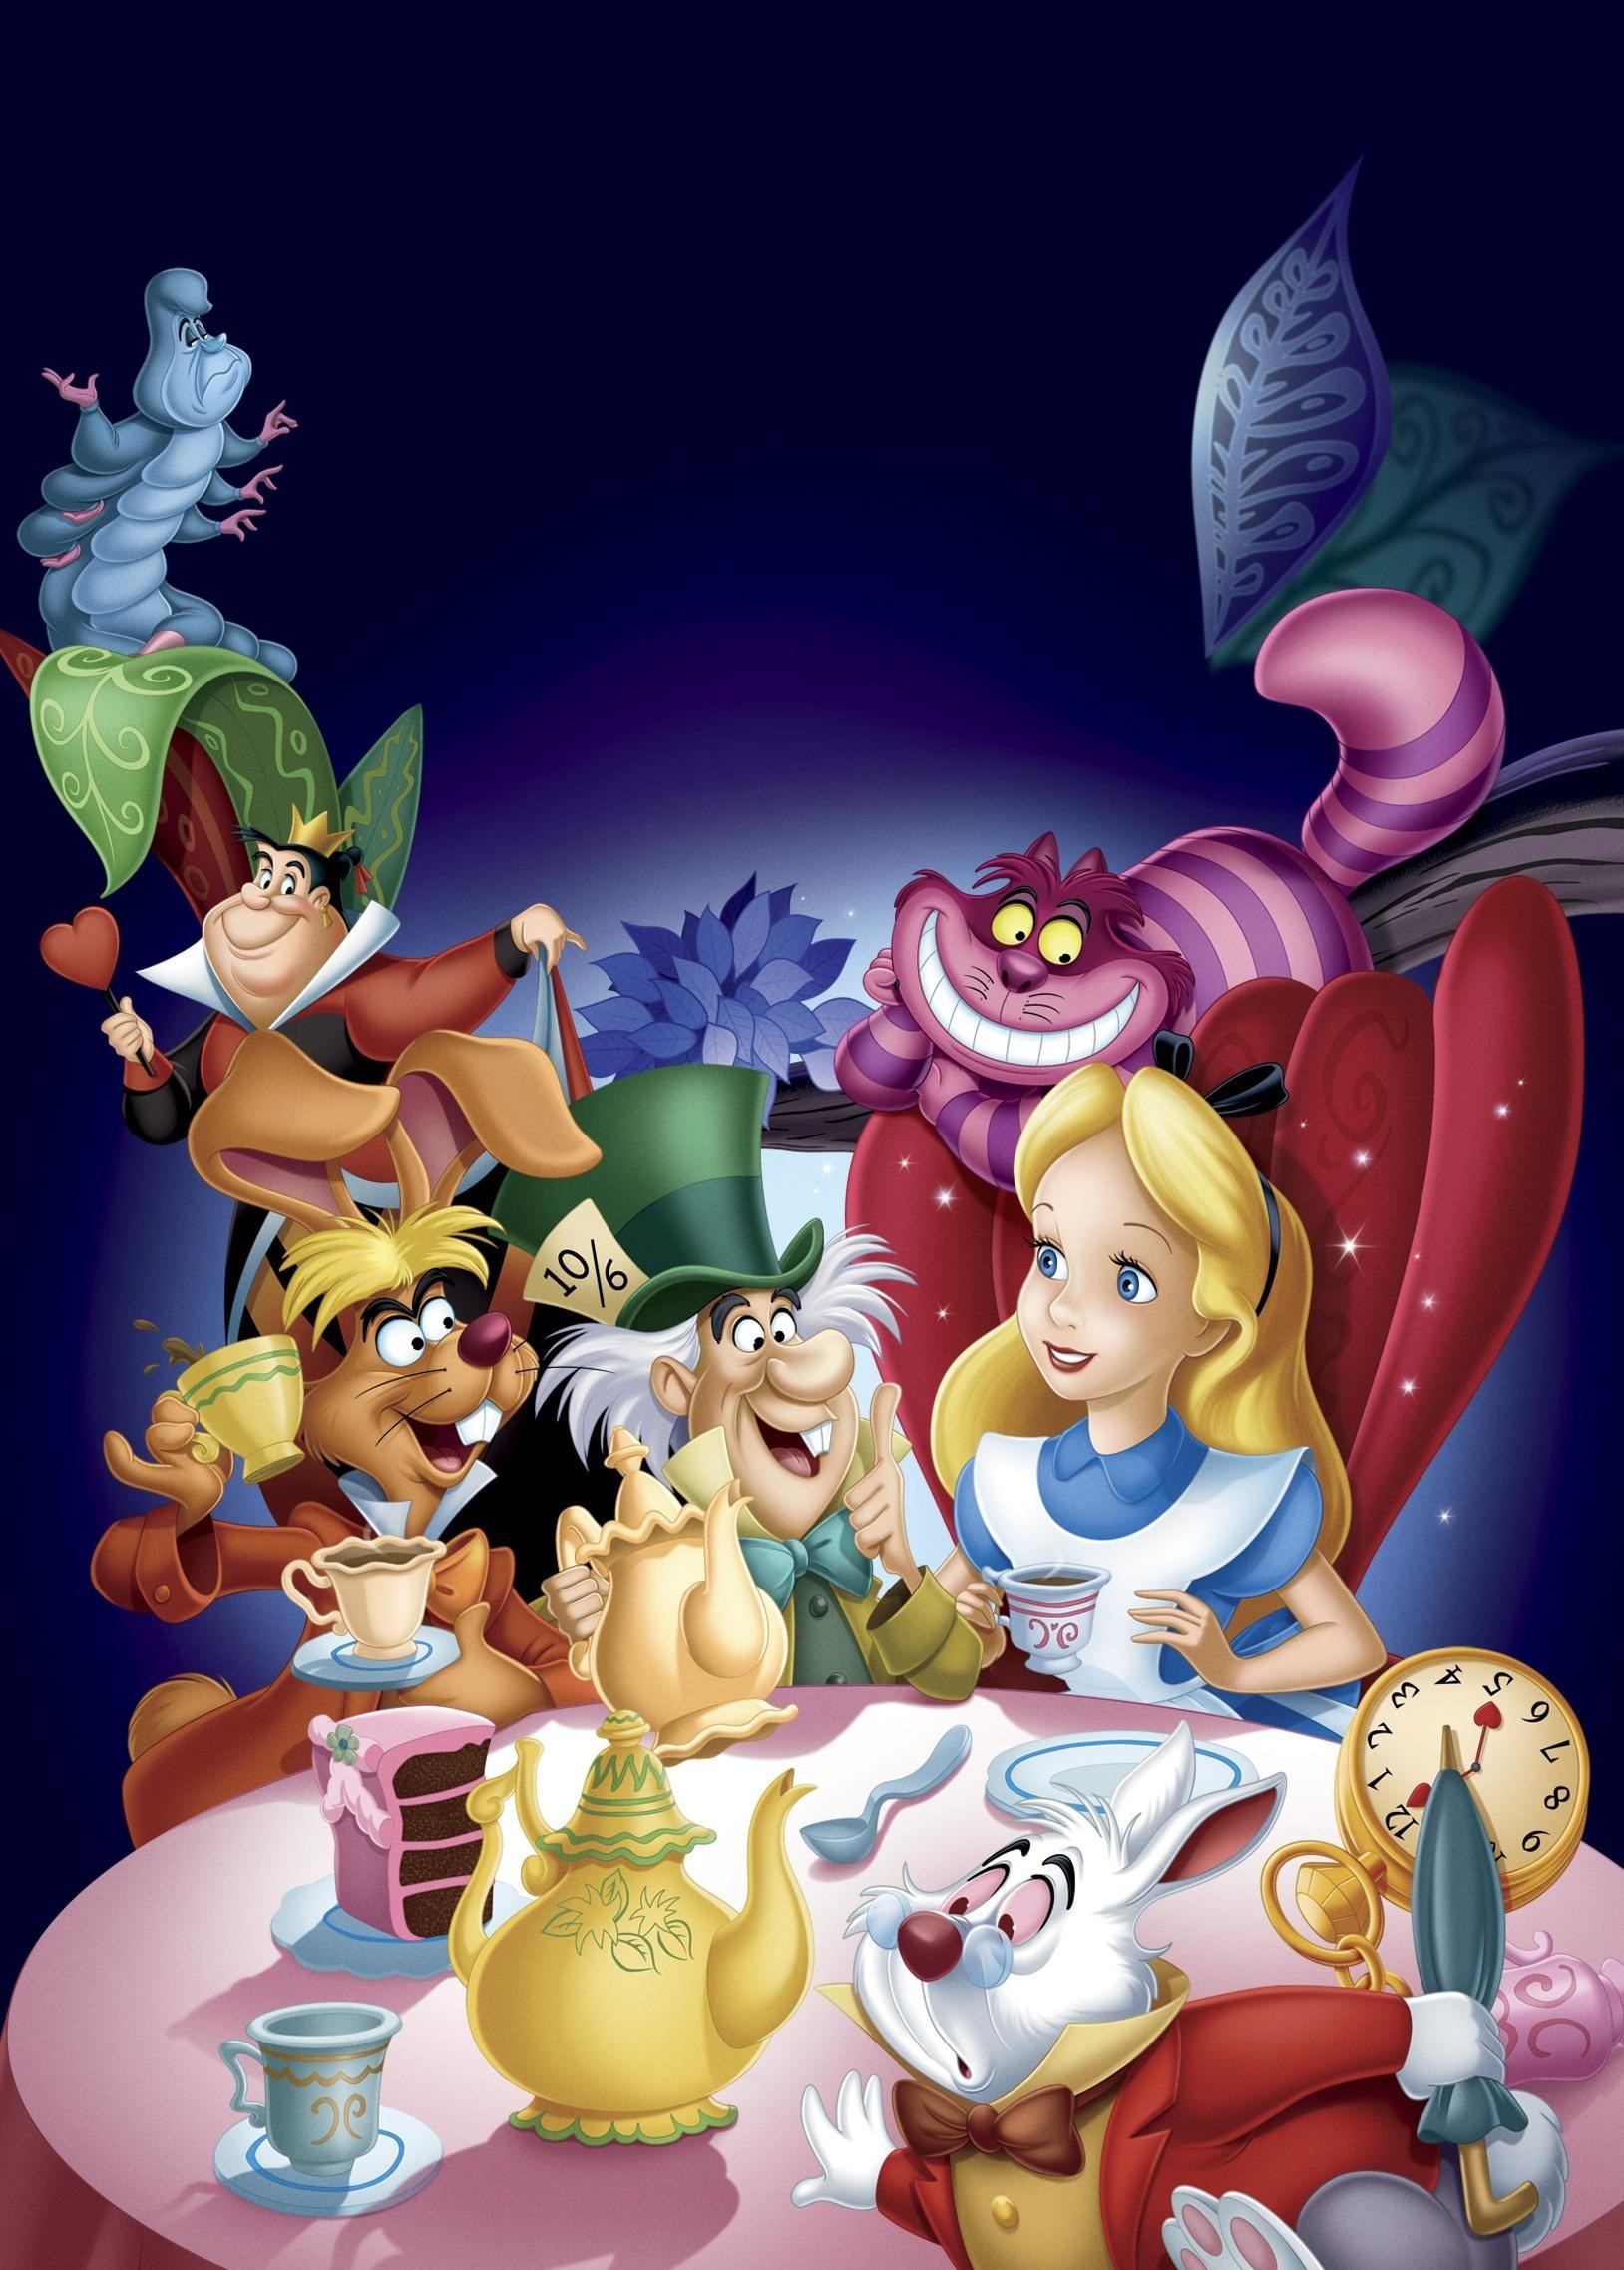 1628x2275 Alice in Wonderland poster by WithLoveShannon on Etsy